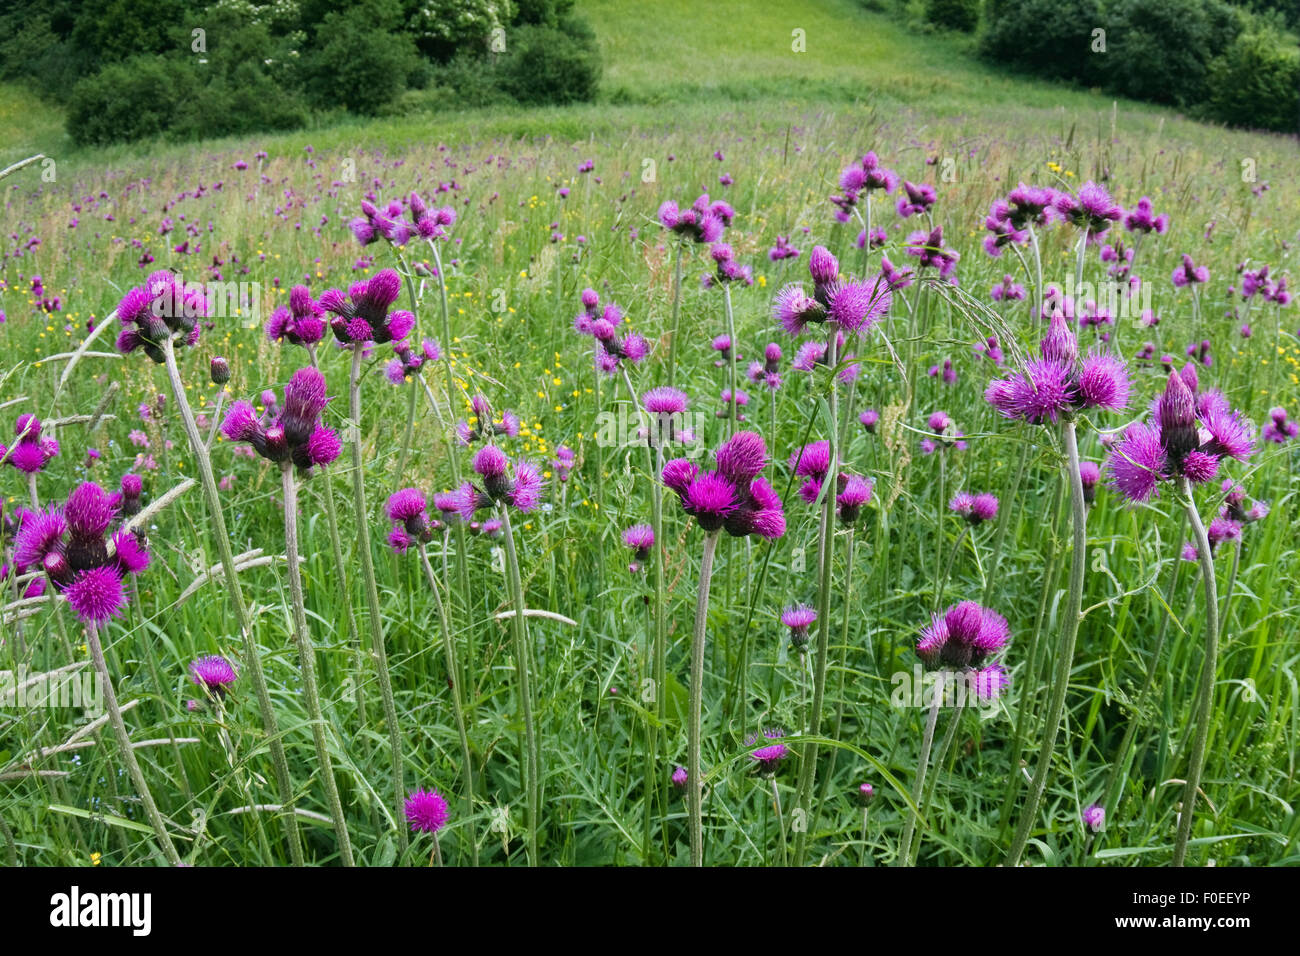 Thistles (Cirsium rivulare) flowering in a meadow, Poloniny National Park, East Slovakia, Europe, June 2008 Stock Photo